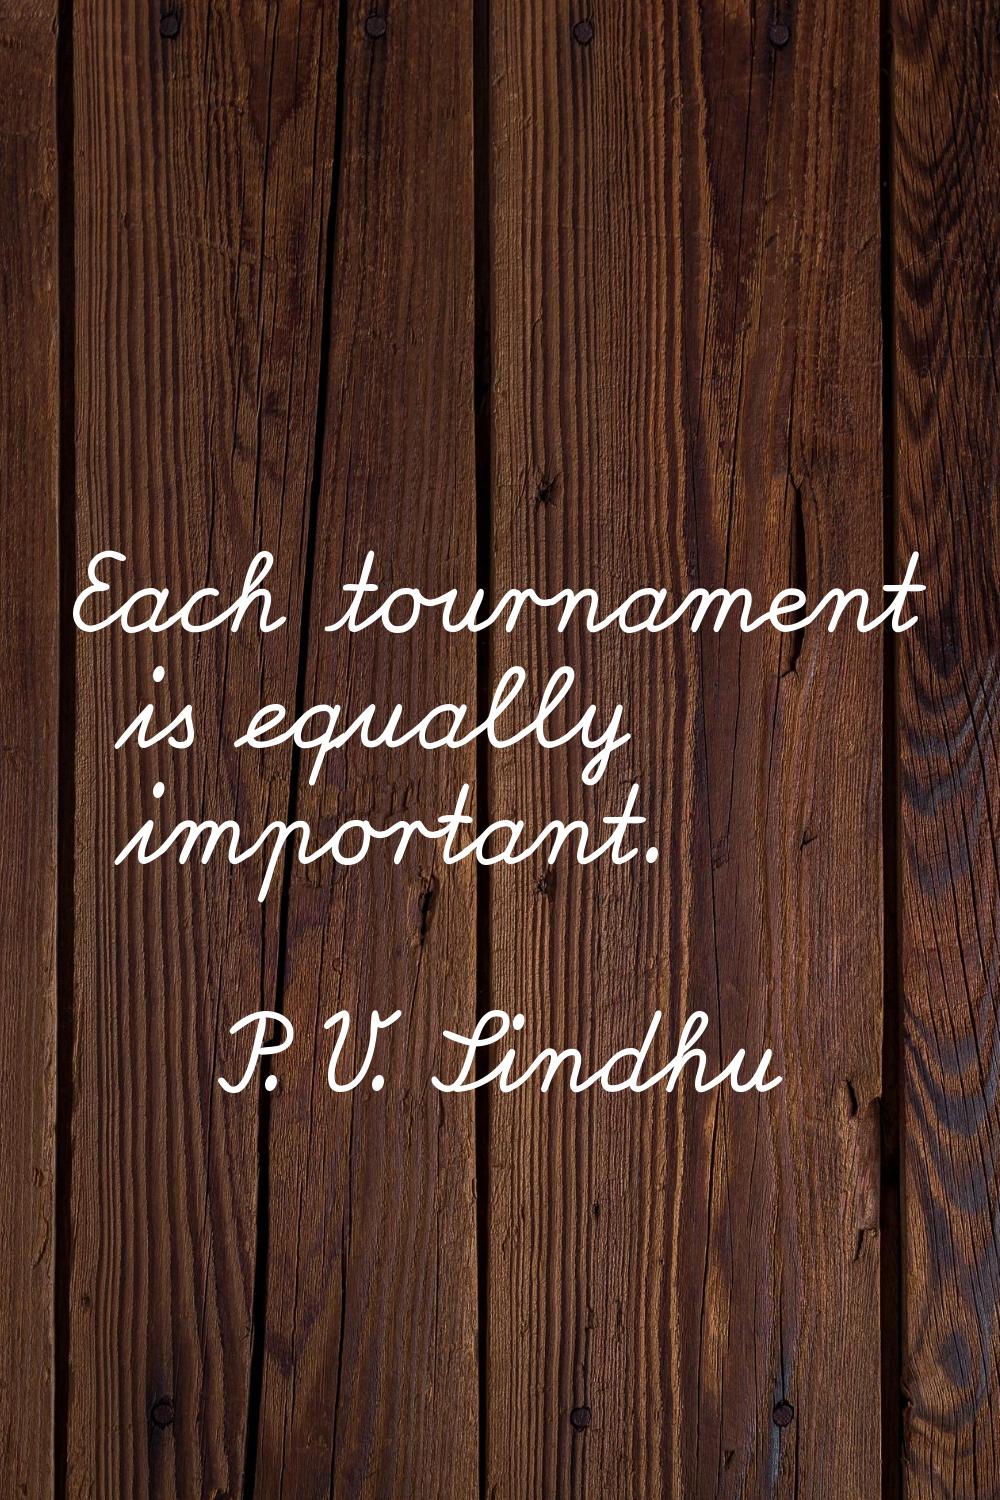 Each tournament is equally important.